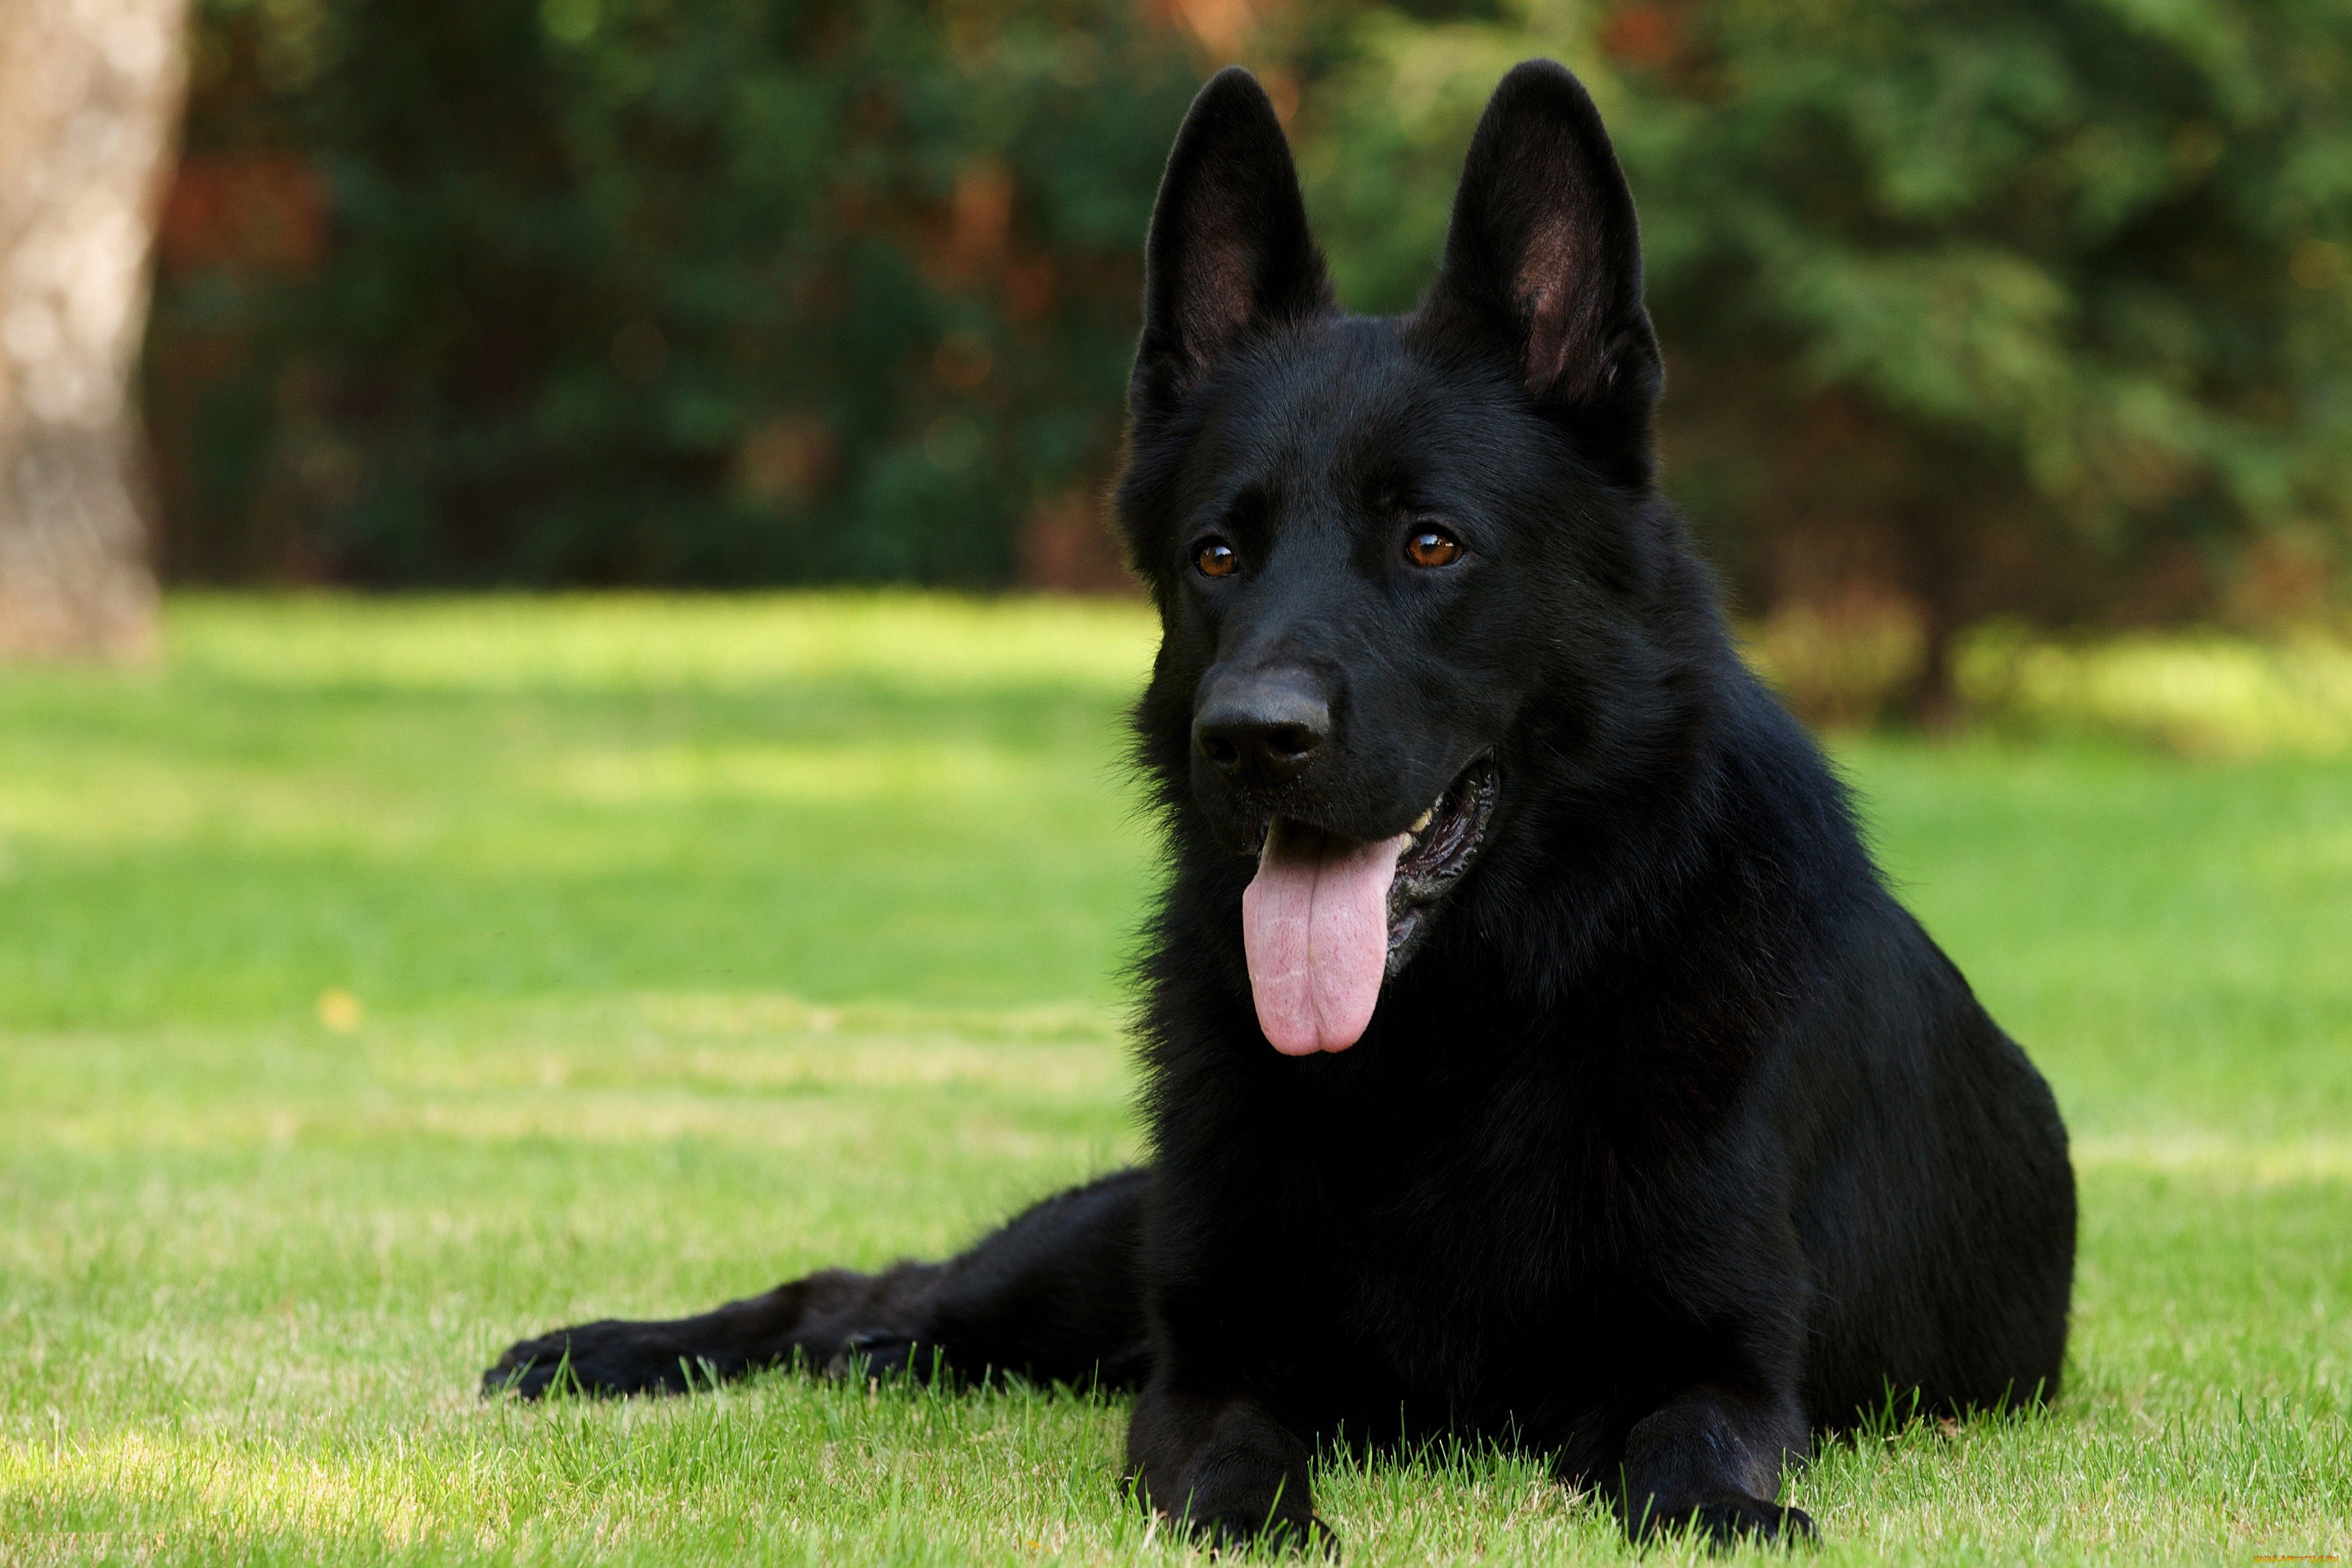 Black Dog Full HD Wallpaper and Background Image | 3600x2400 | ID:281467